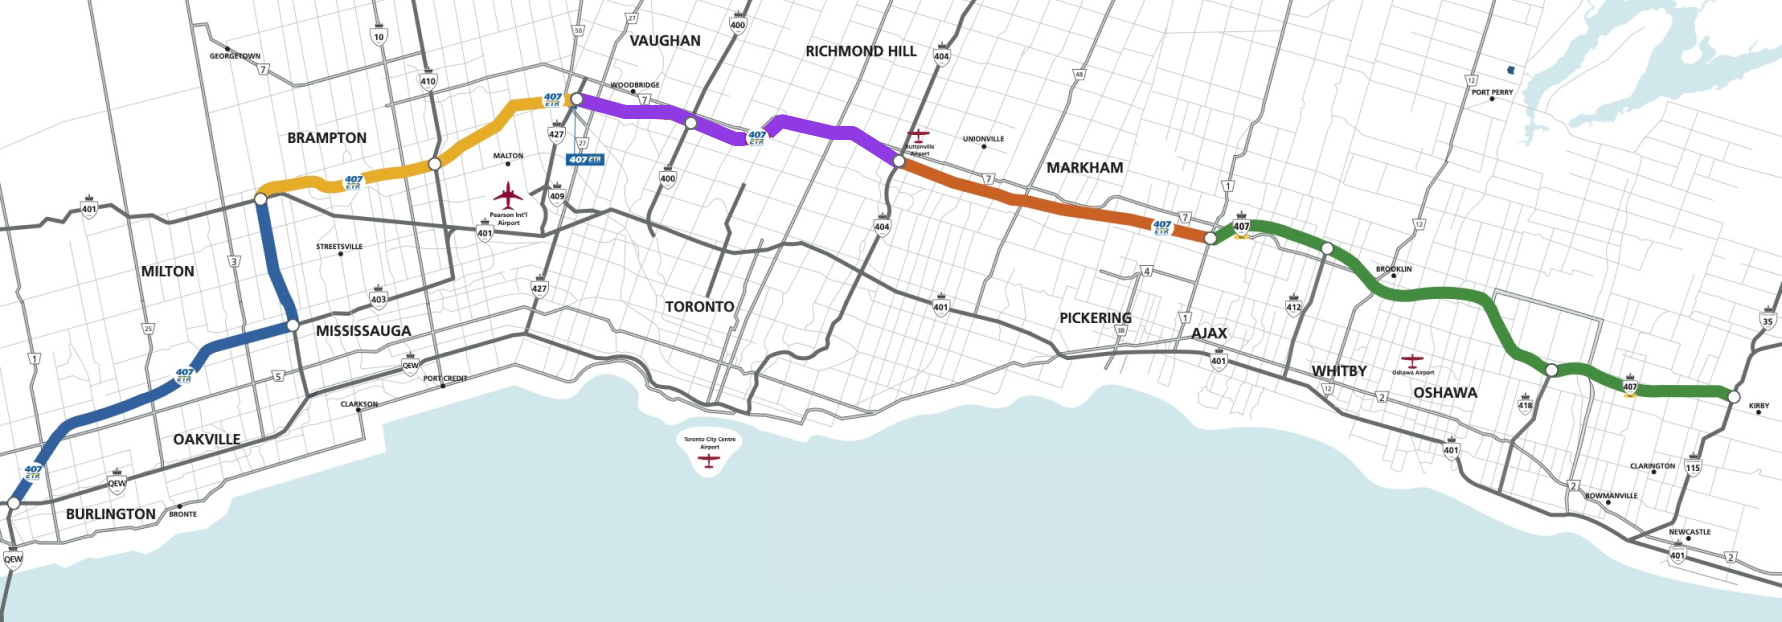 A map of Autoroute 407 ETR and Autoroute 407, with Autoroute 407 starting from Regional Road 1 to Highway 115.